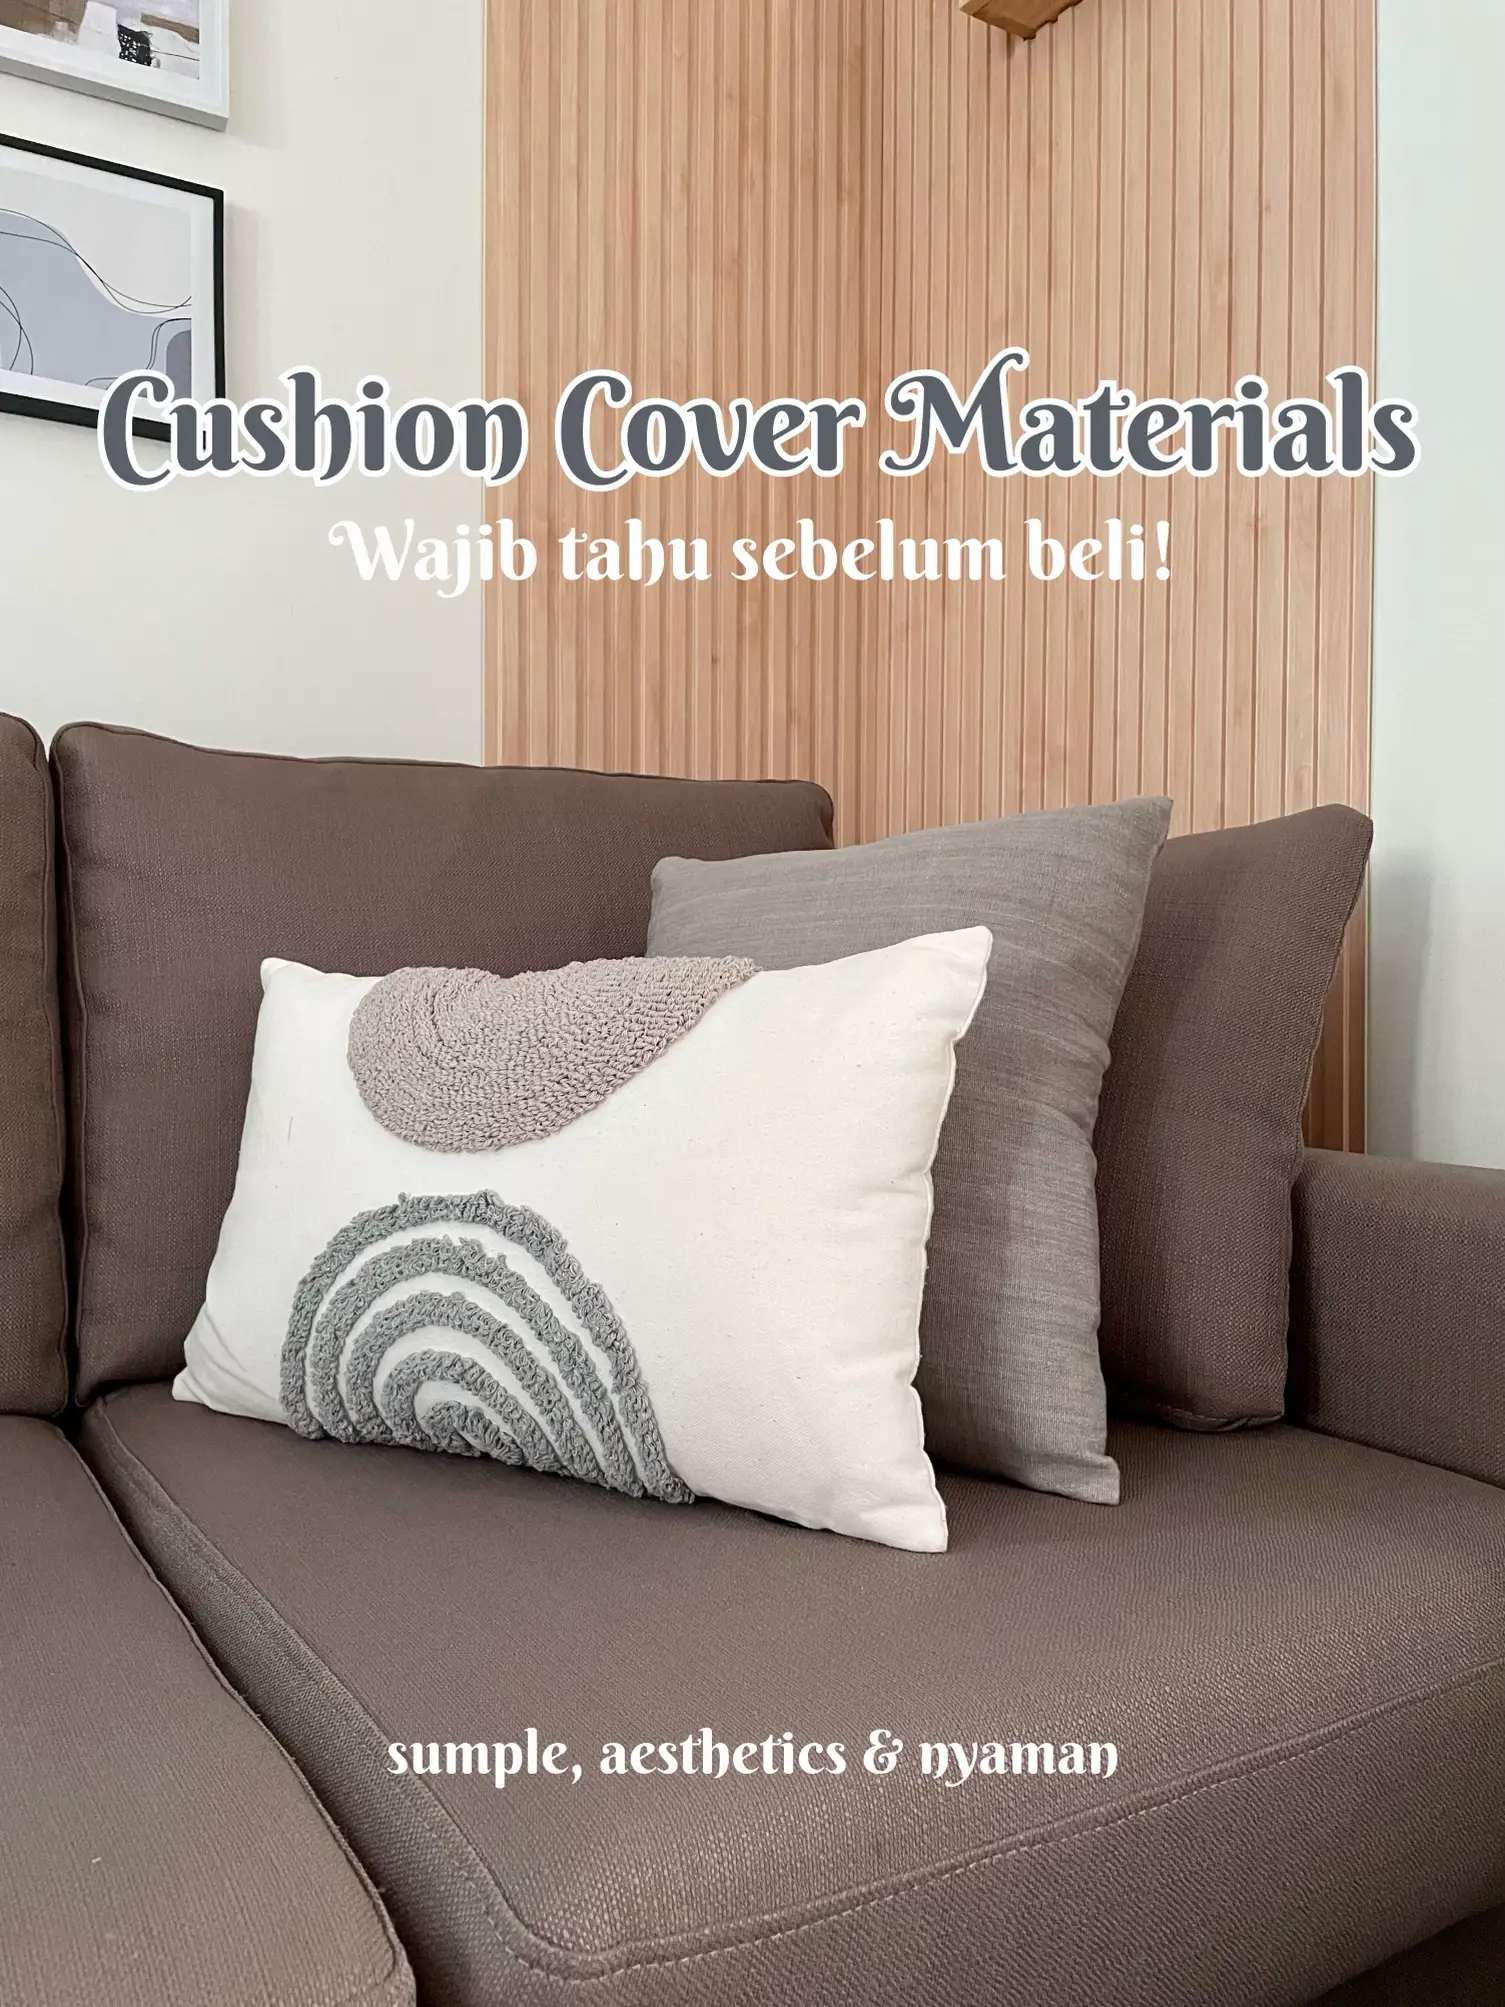 benefits of sofa covers, Gallery posted by kenziemariehome